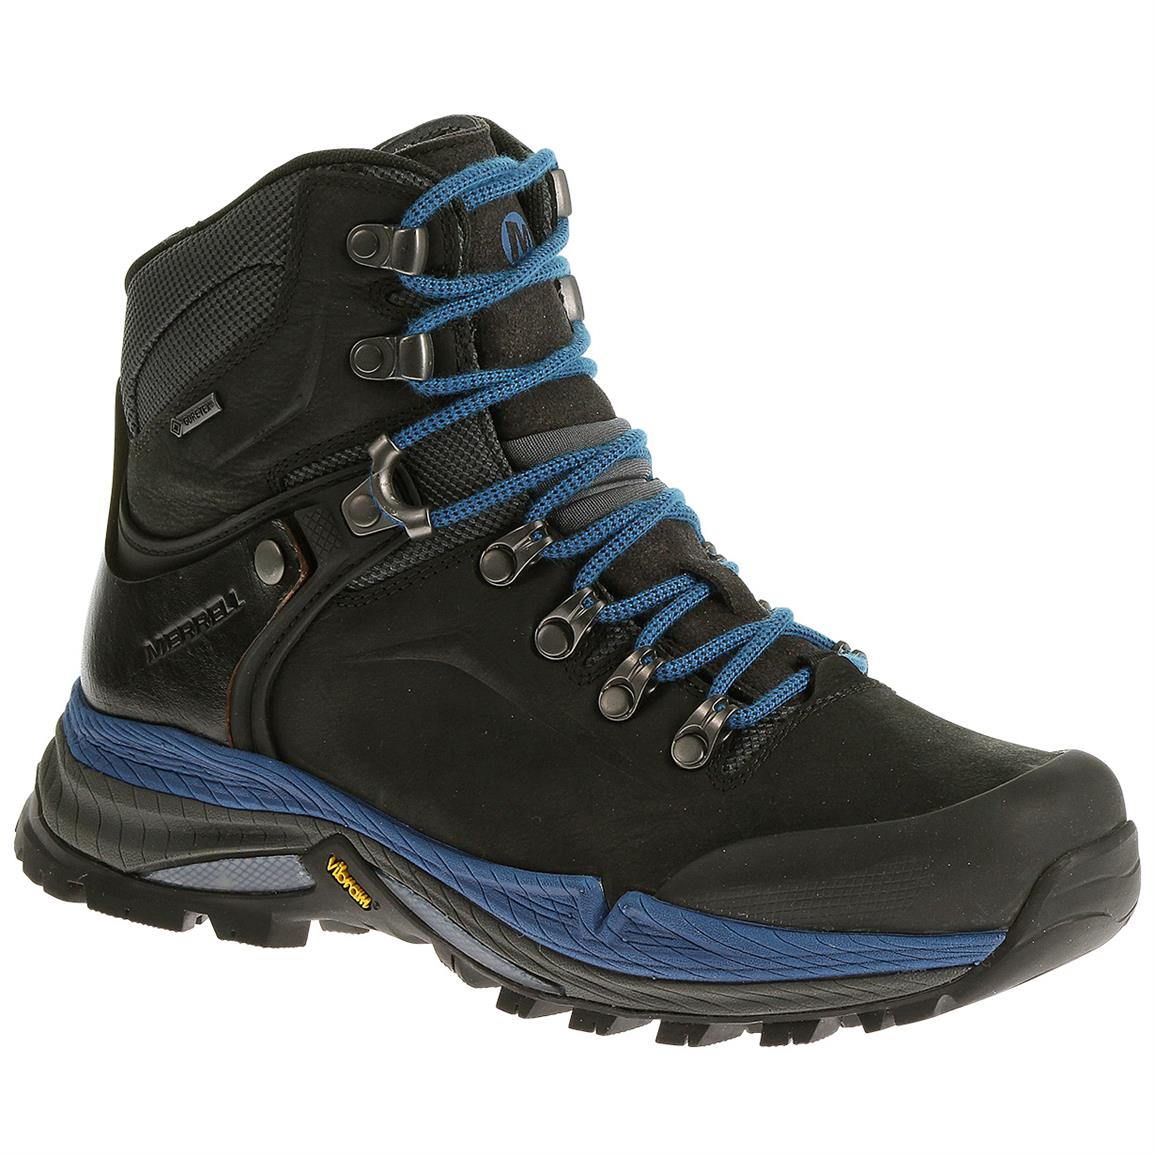 Women's Merrell Crestbound GORE-TEX Hiking Boots - 643887, Hiking Boots ...